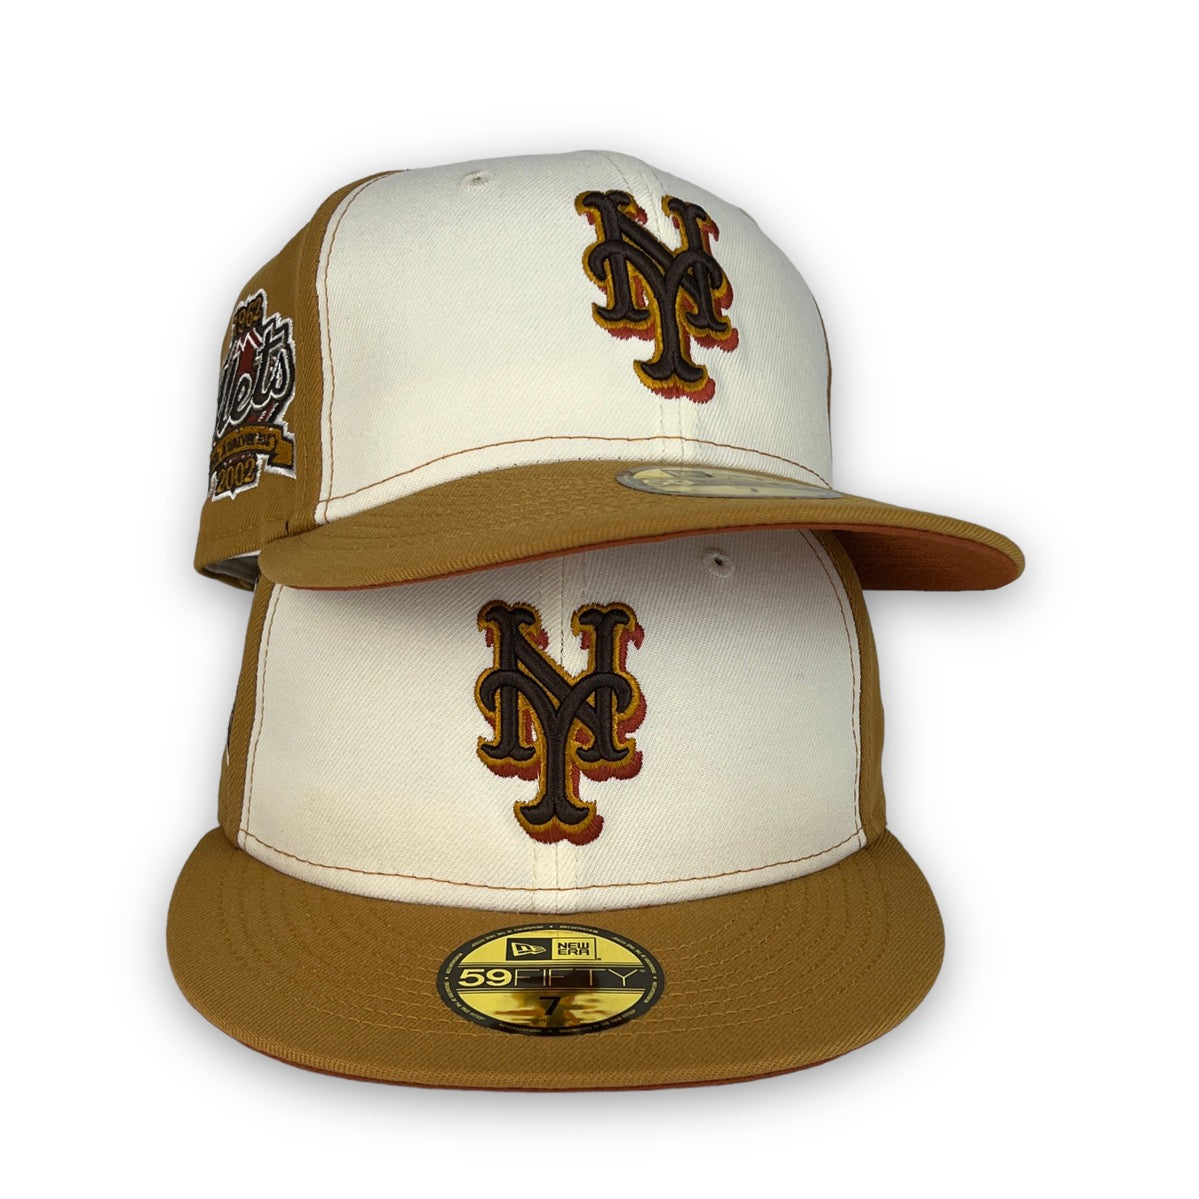 KTZ New York Mets White Out 59fifty Fitted Cap for Men